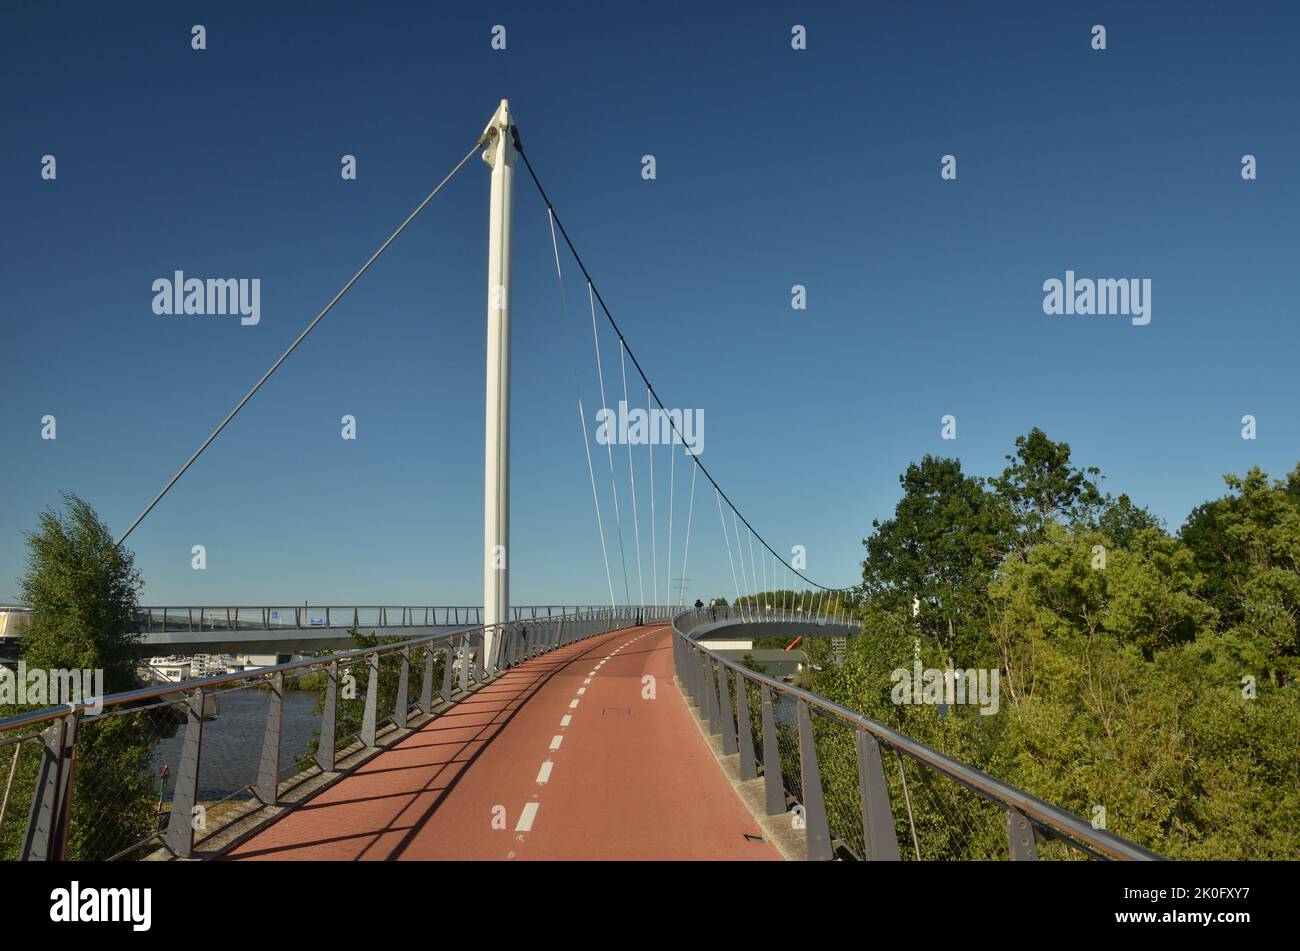 A purpose-built cable stayed cycle bridge, near Amsterdam, Netherlands Stock Photo